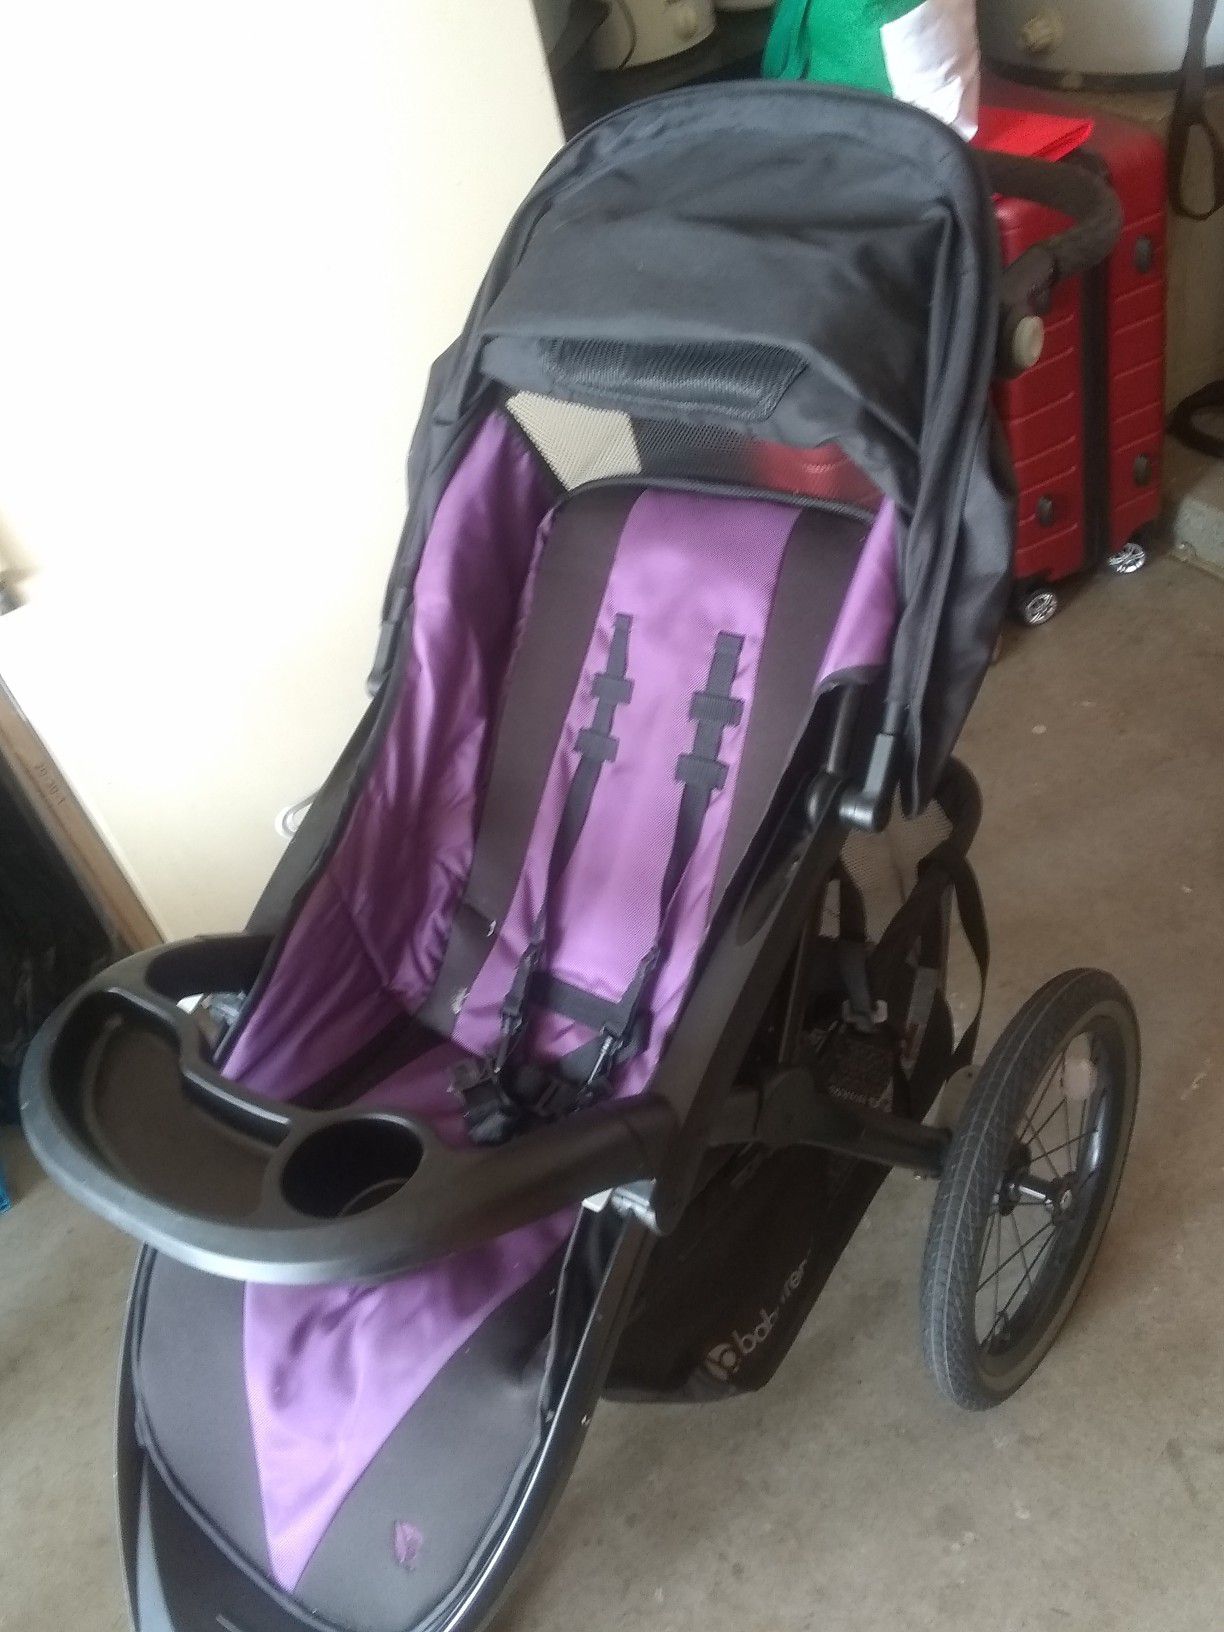 Jogging stroller and MP3 compatible speakers